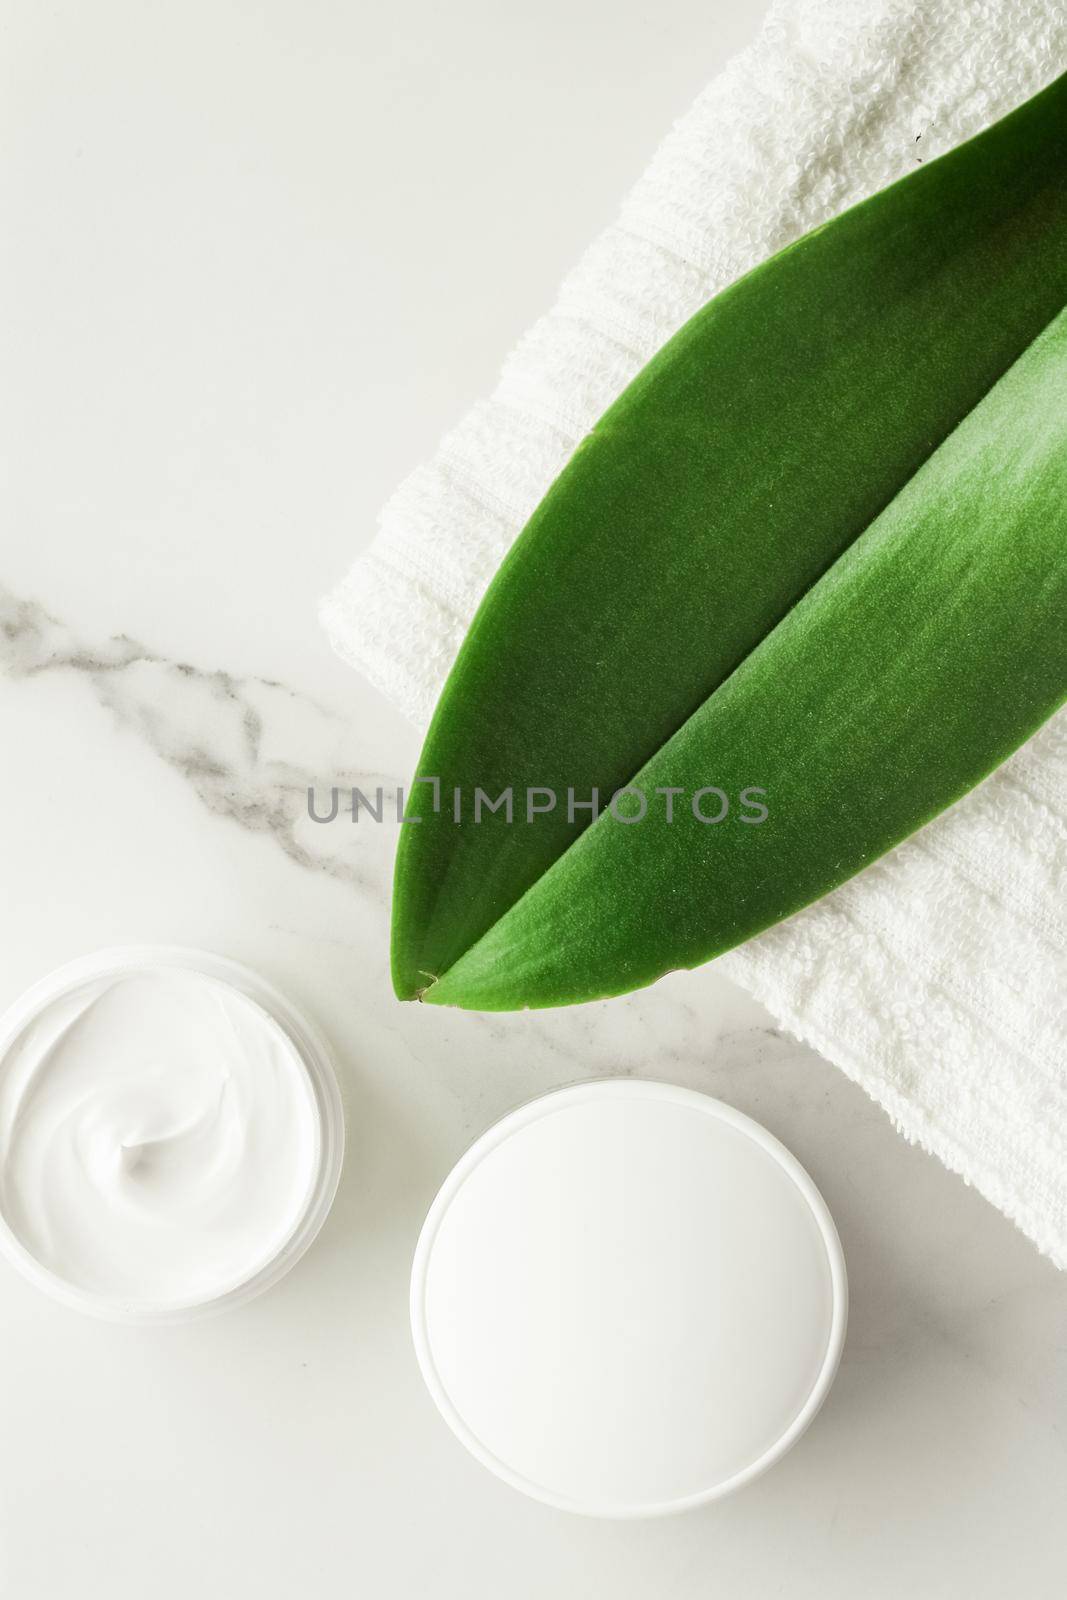 Anti-age cream products on marble, flatlay - skincare and body care, luxury spa and clean cosmetic concept. Beauty of an organic spa experience